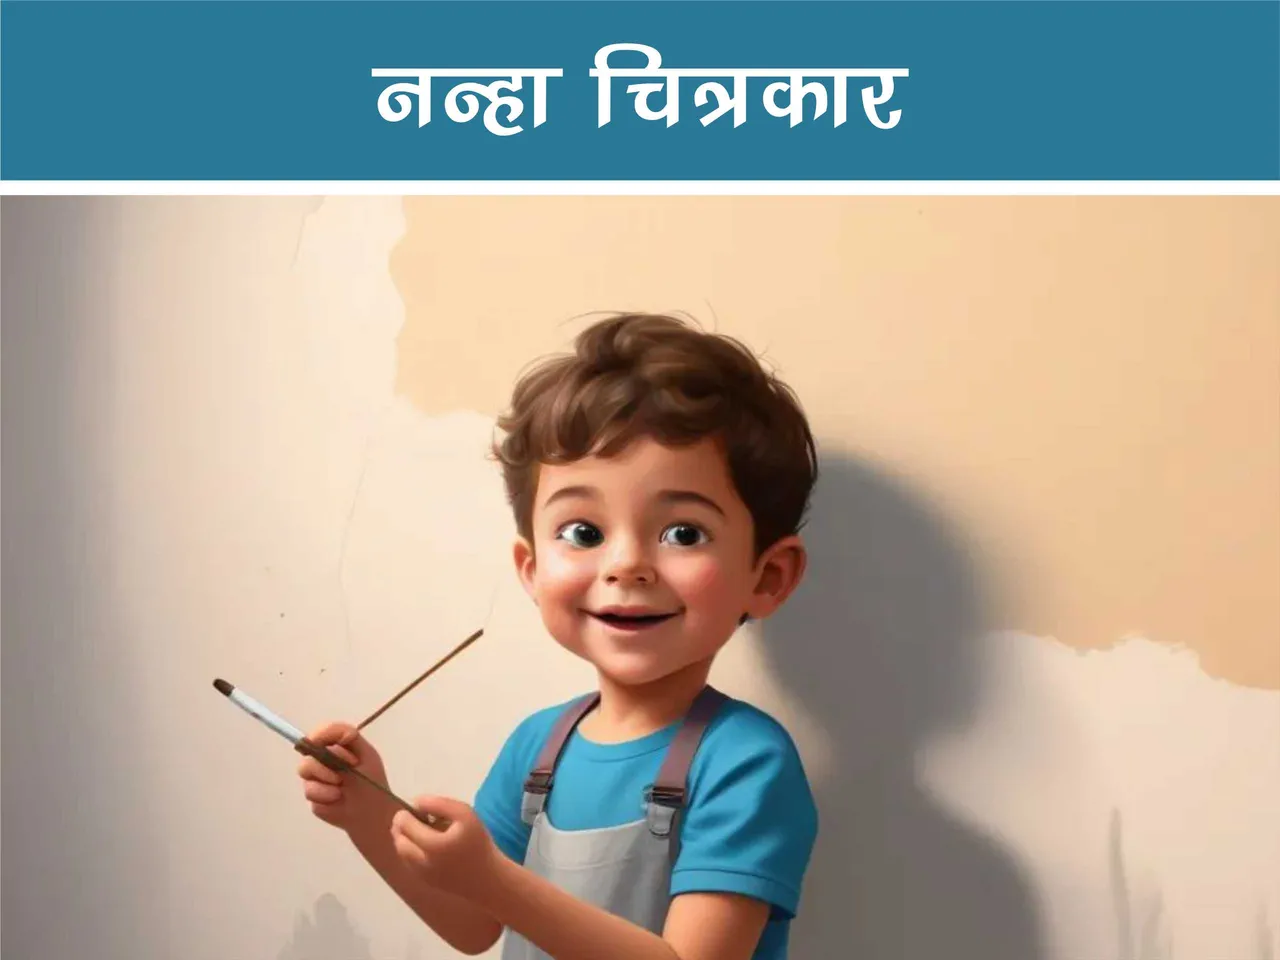 Kid with a painting brush in hand cartoon image